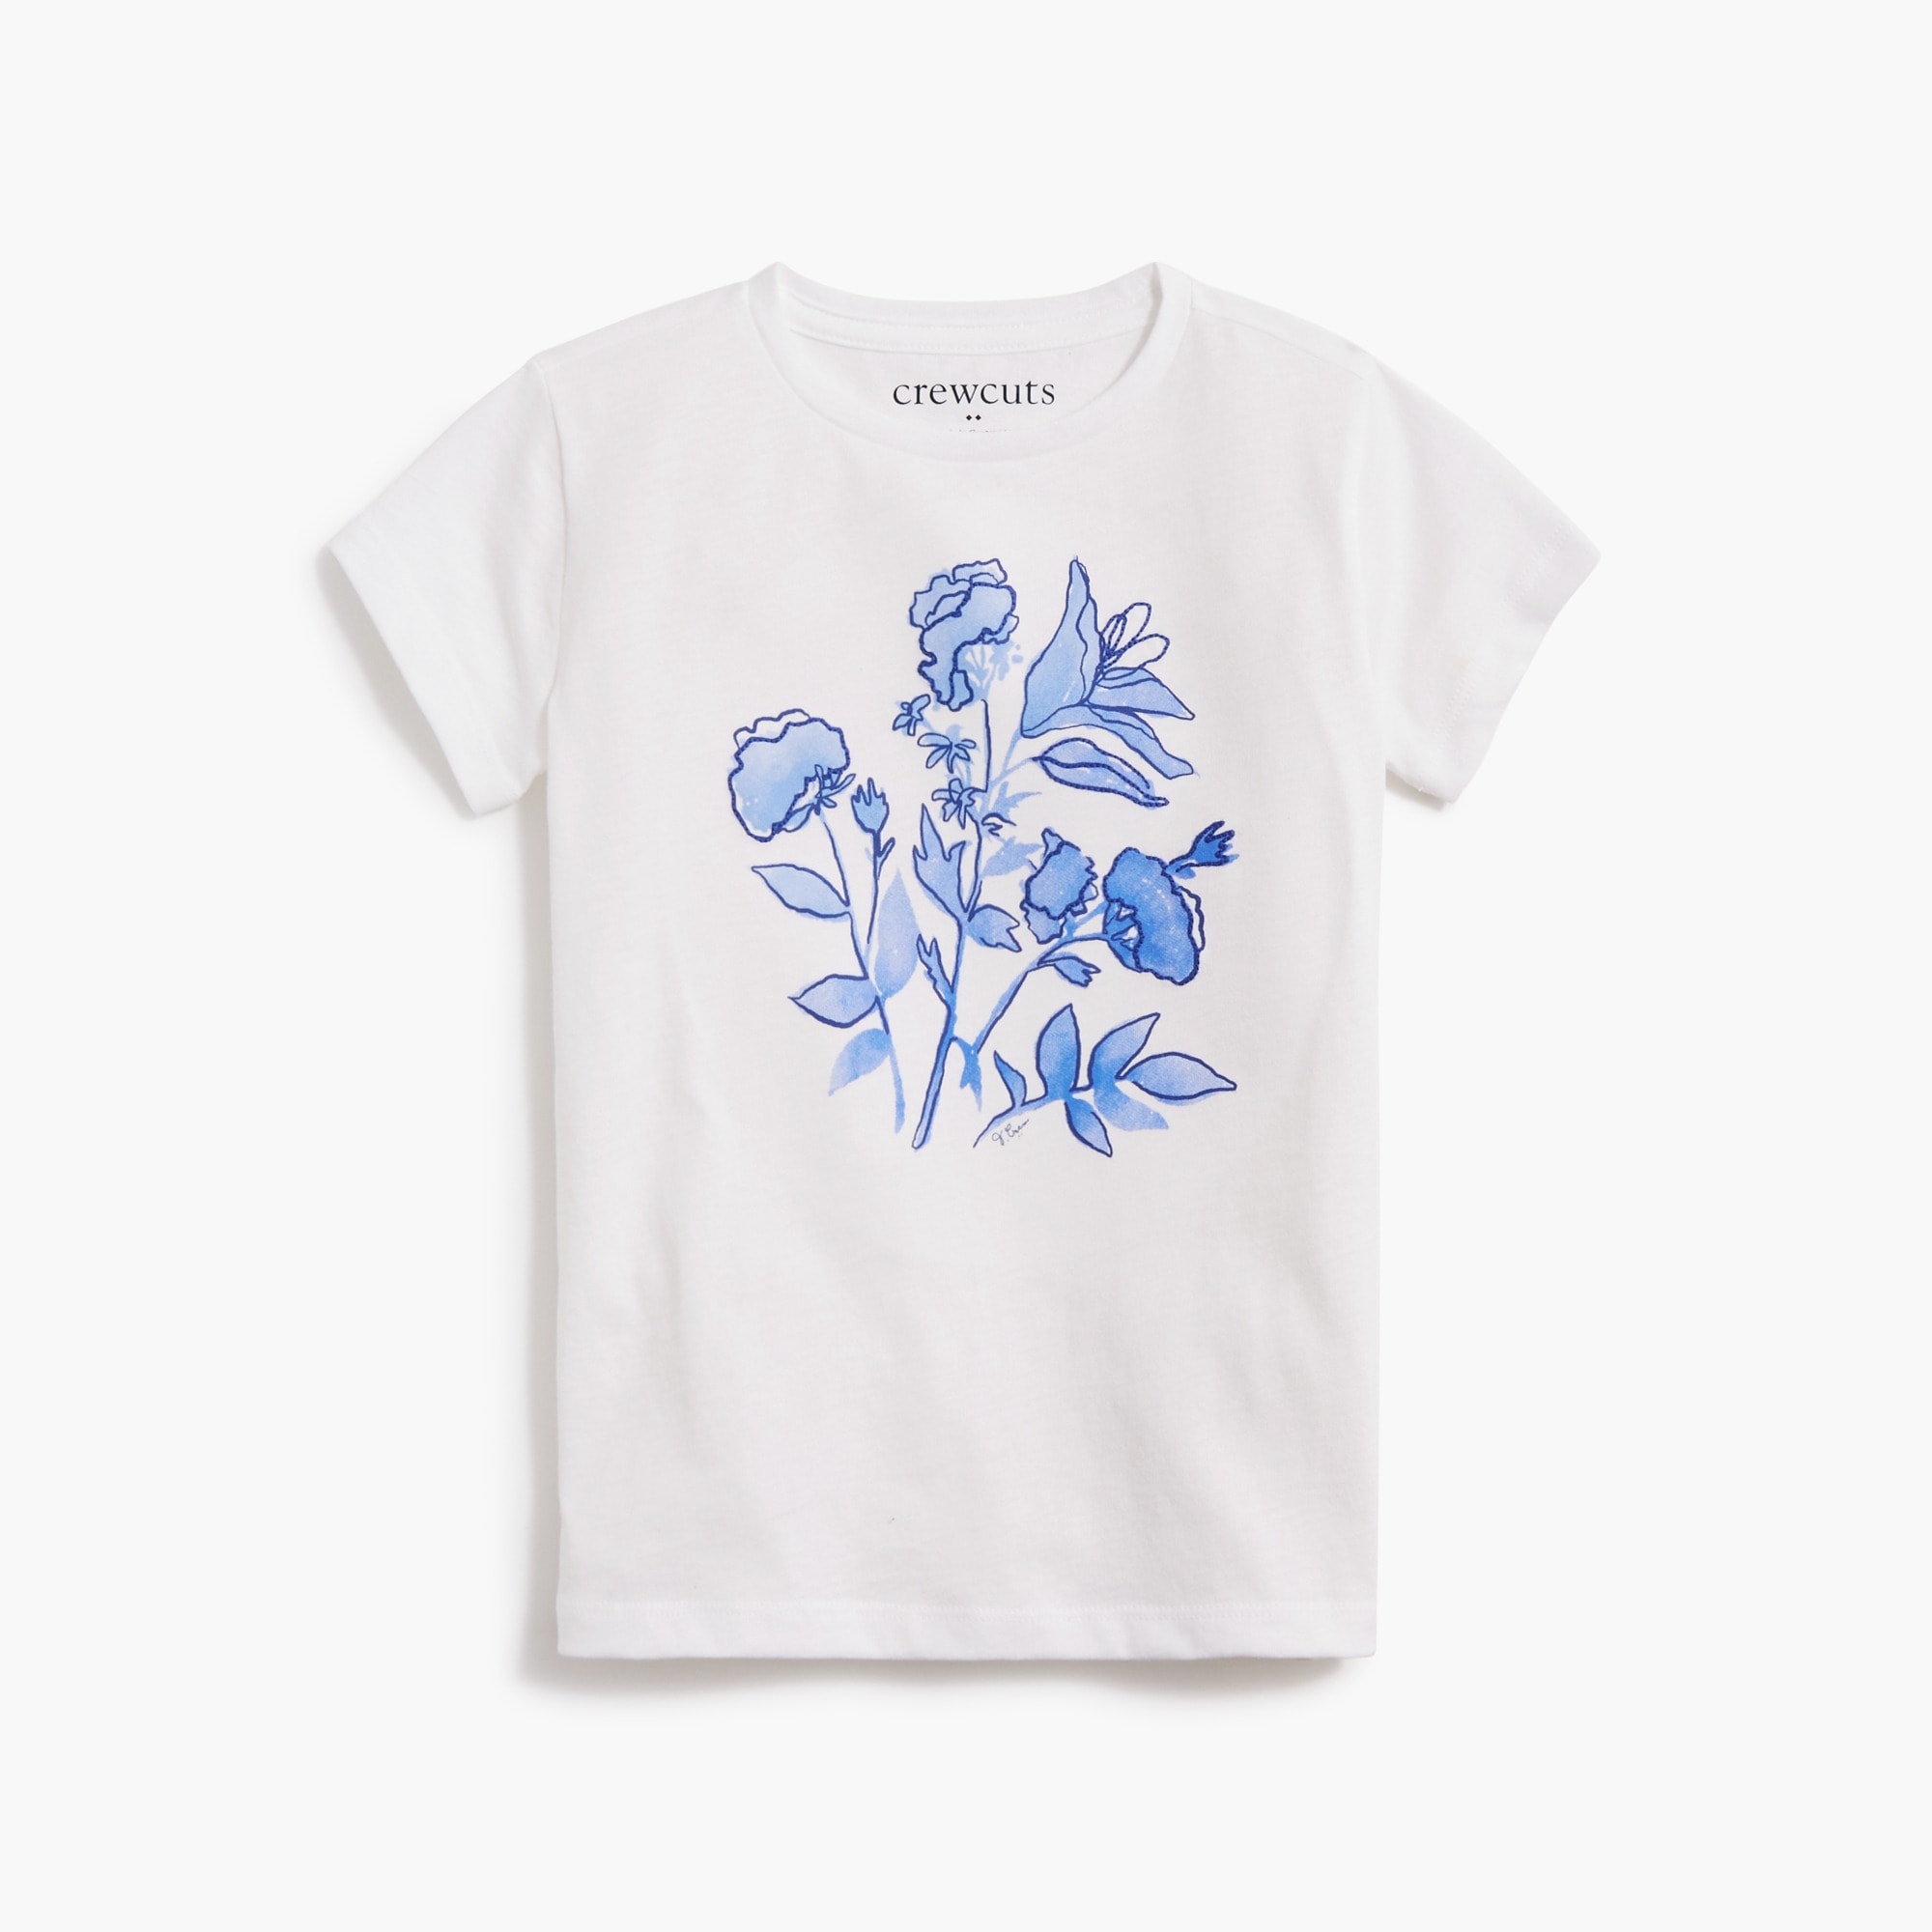 Girls' embroidered flowers graphic tee